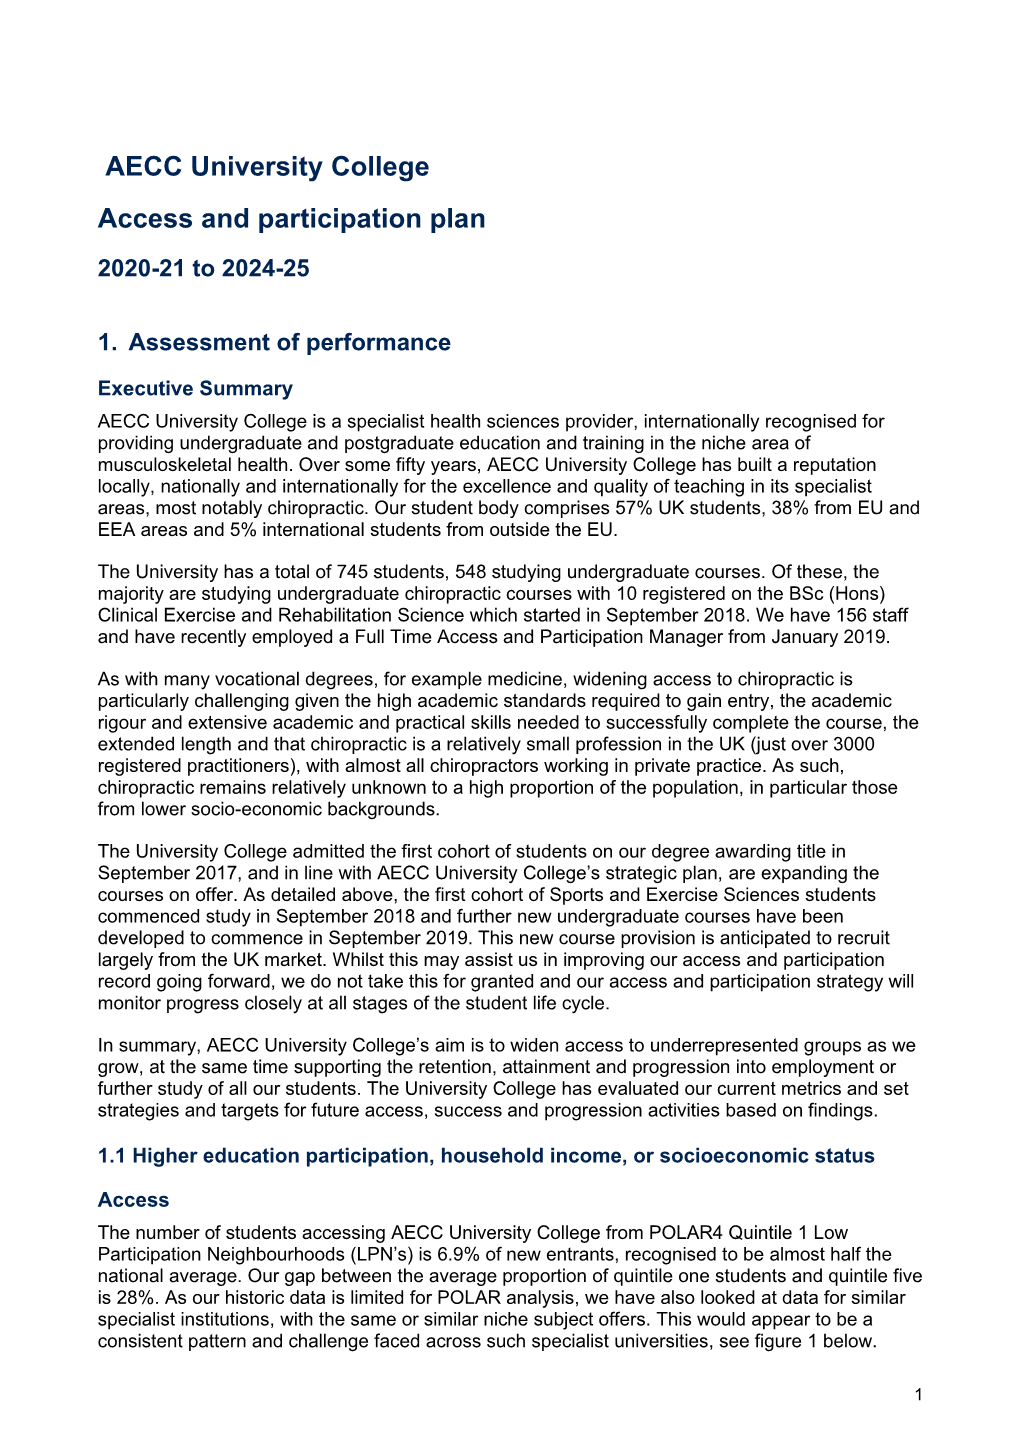 AECC University College Access and Participation Plan 2020-21 to 2024-25